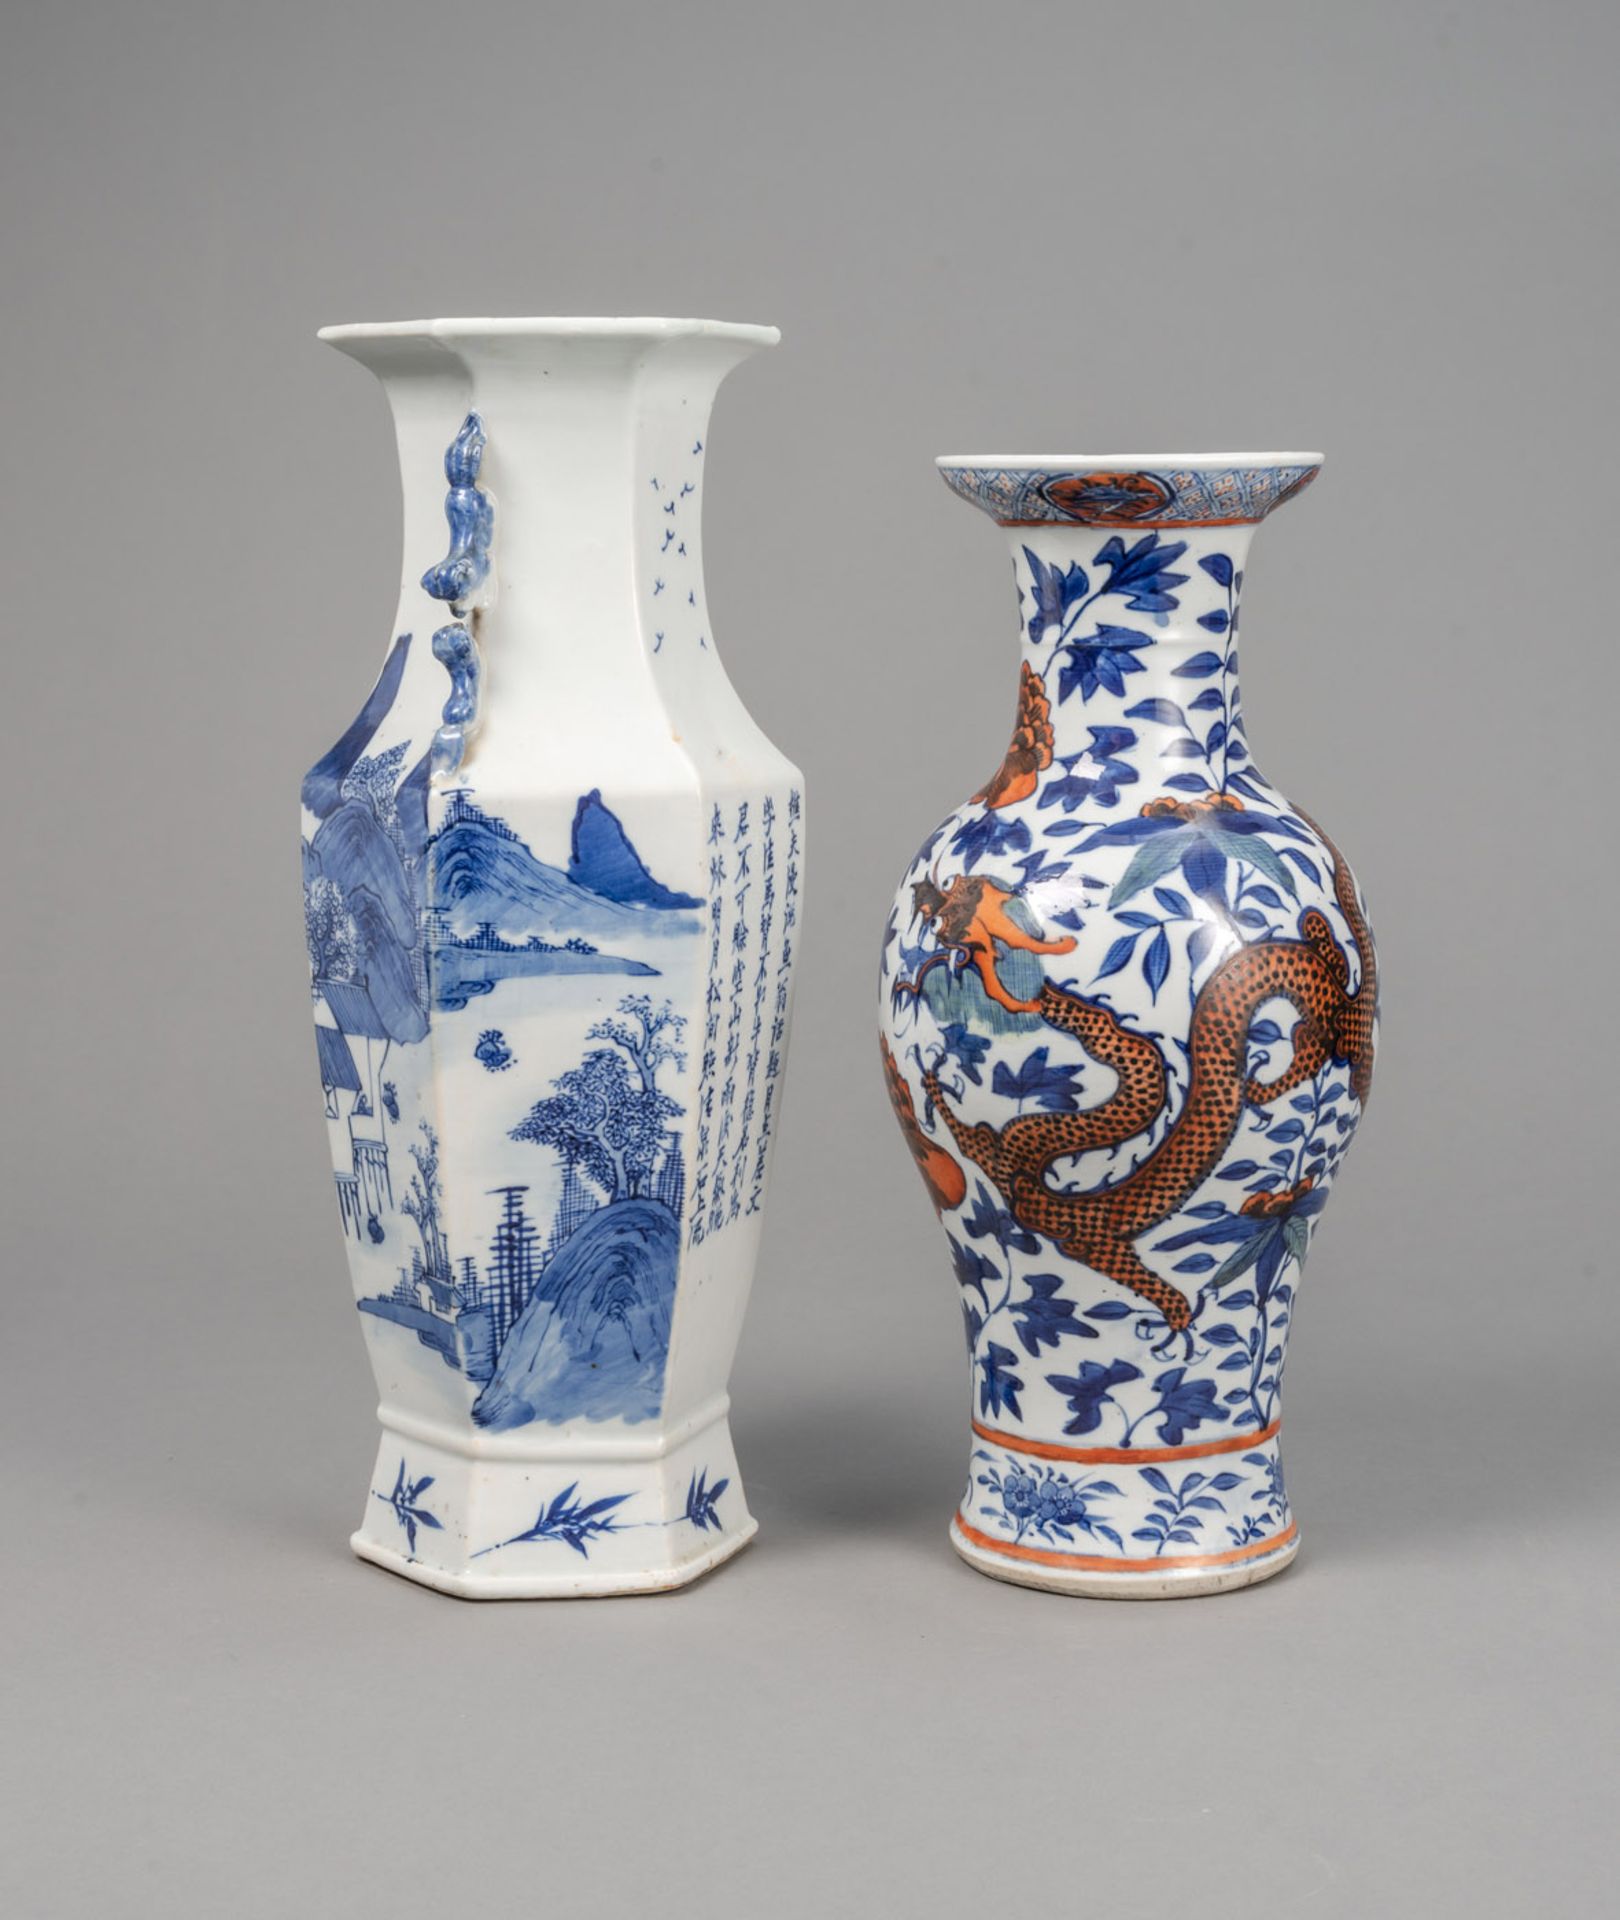 A HEXAGONAL BLUE AND WHITE LANDSCAPE PORCELAIN VASE AND A BLUE AND RED DRAGON VASE - Image 3 of 5